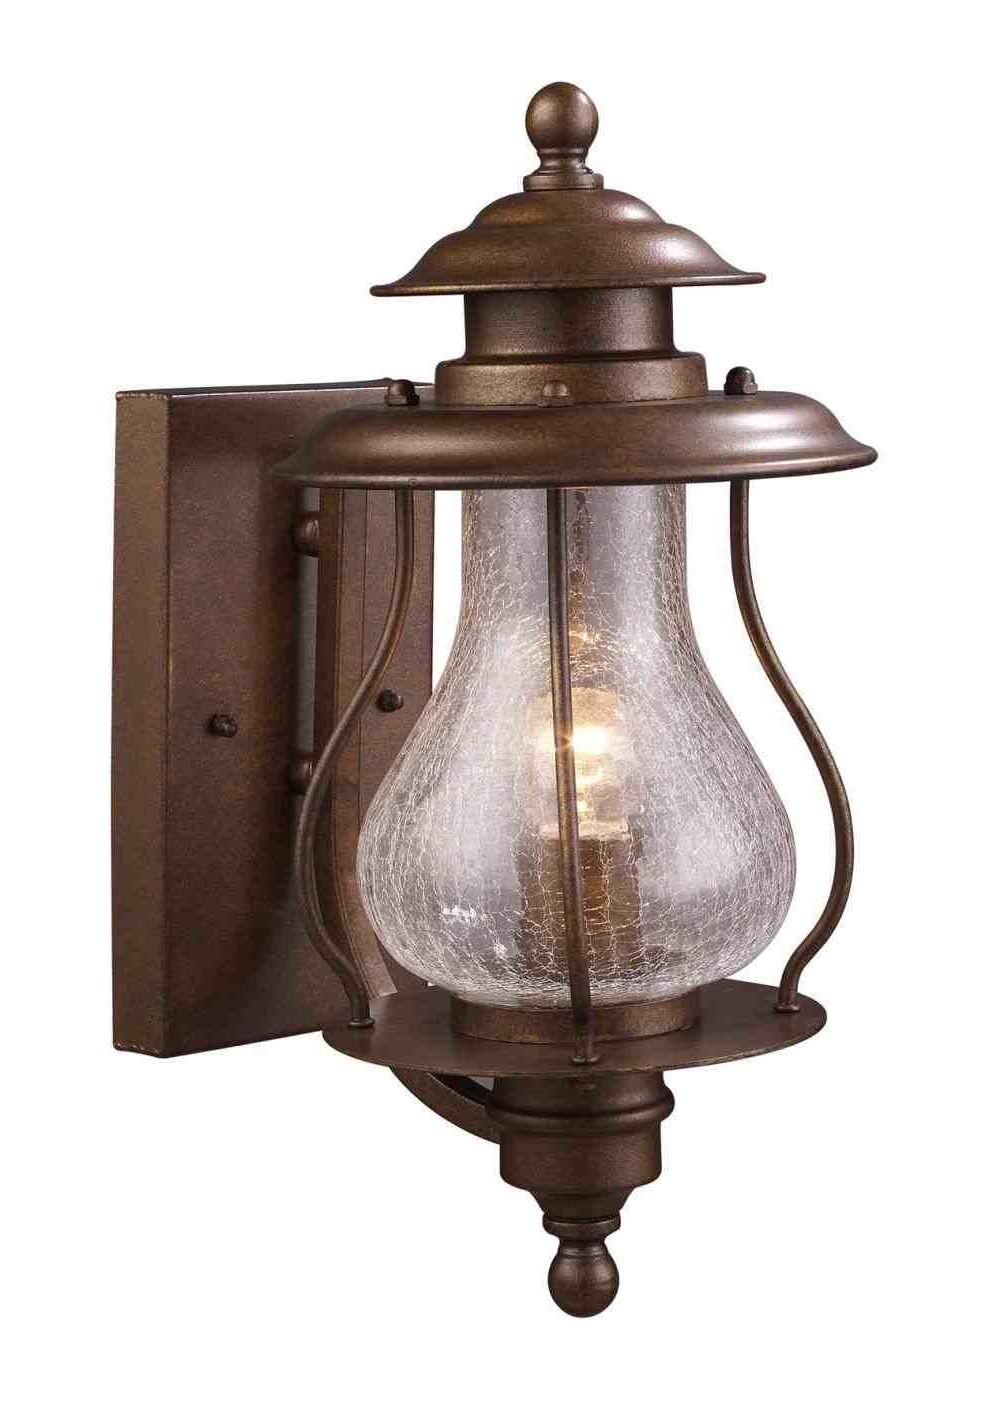 Quoizel Outdoor Wall Light Fixture Ny Newbury Inch Wide Pertaining To Latest Quoizel Outdoor Wall Lighting (View 15 of 20)